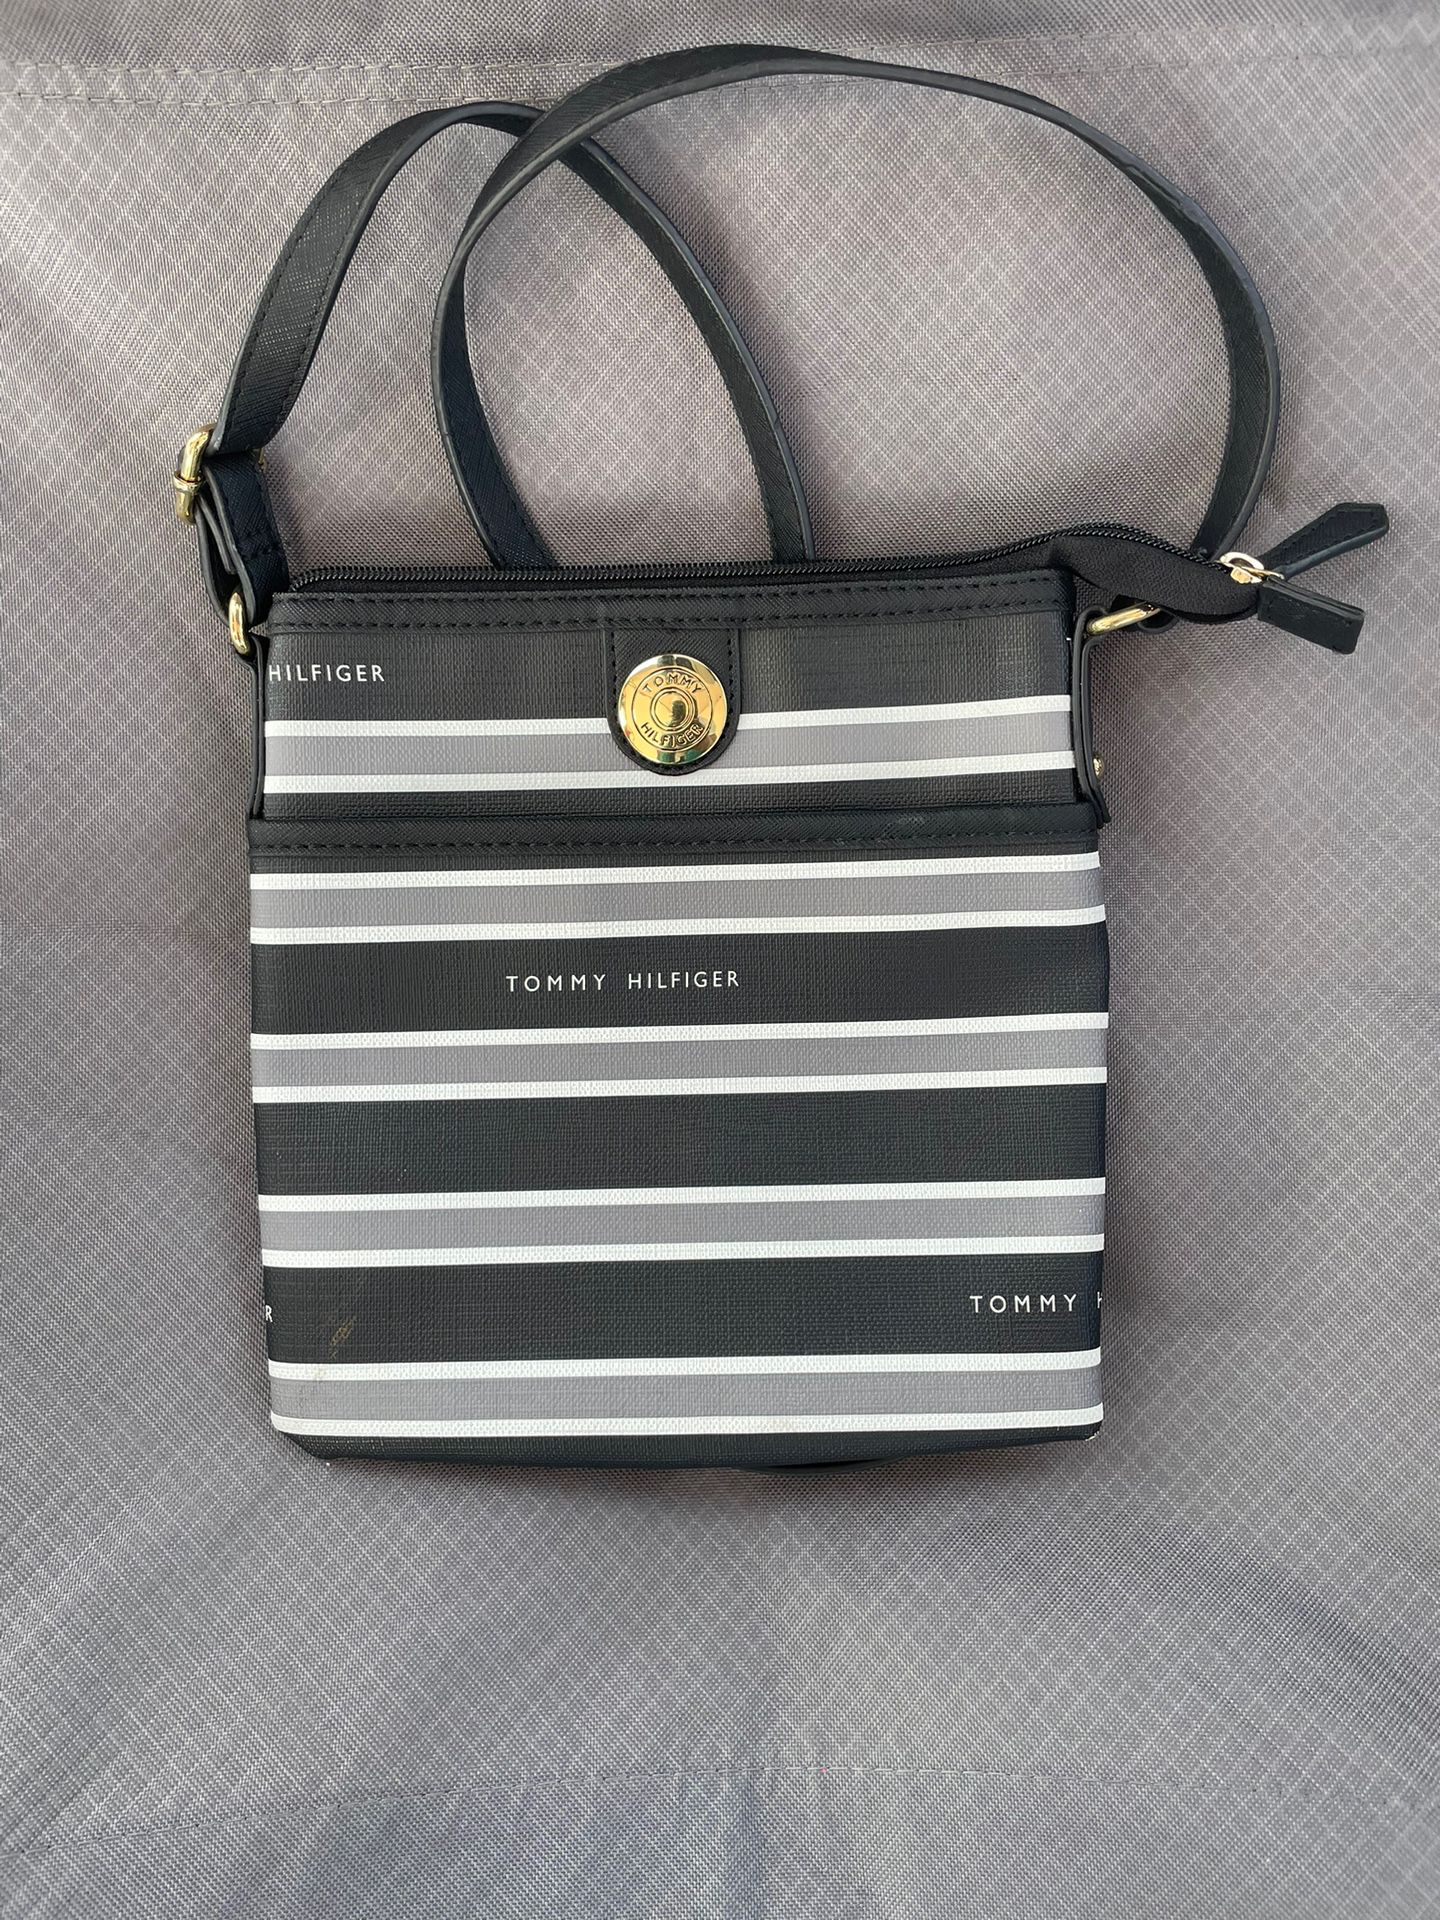 AUTHENTIC TOMMY HILFIGER LITTLE BAG (SUPER LIGHT WEIGHT)